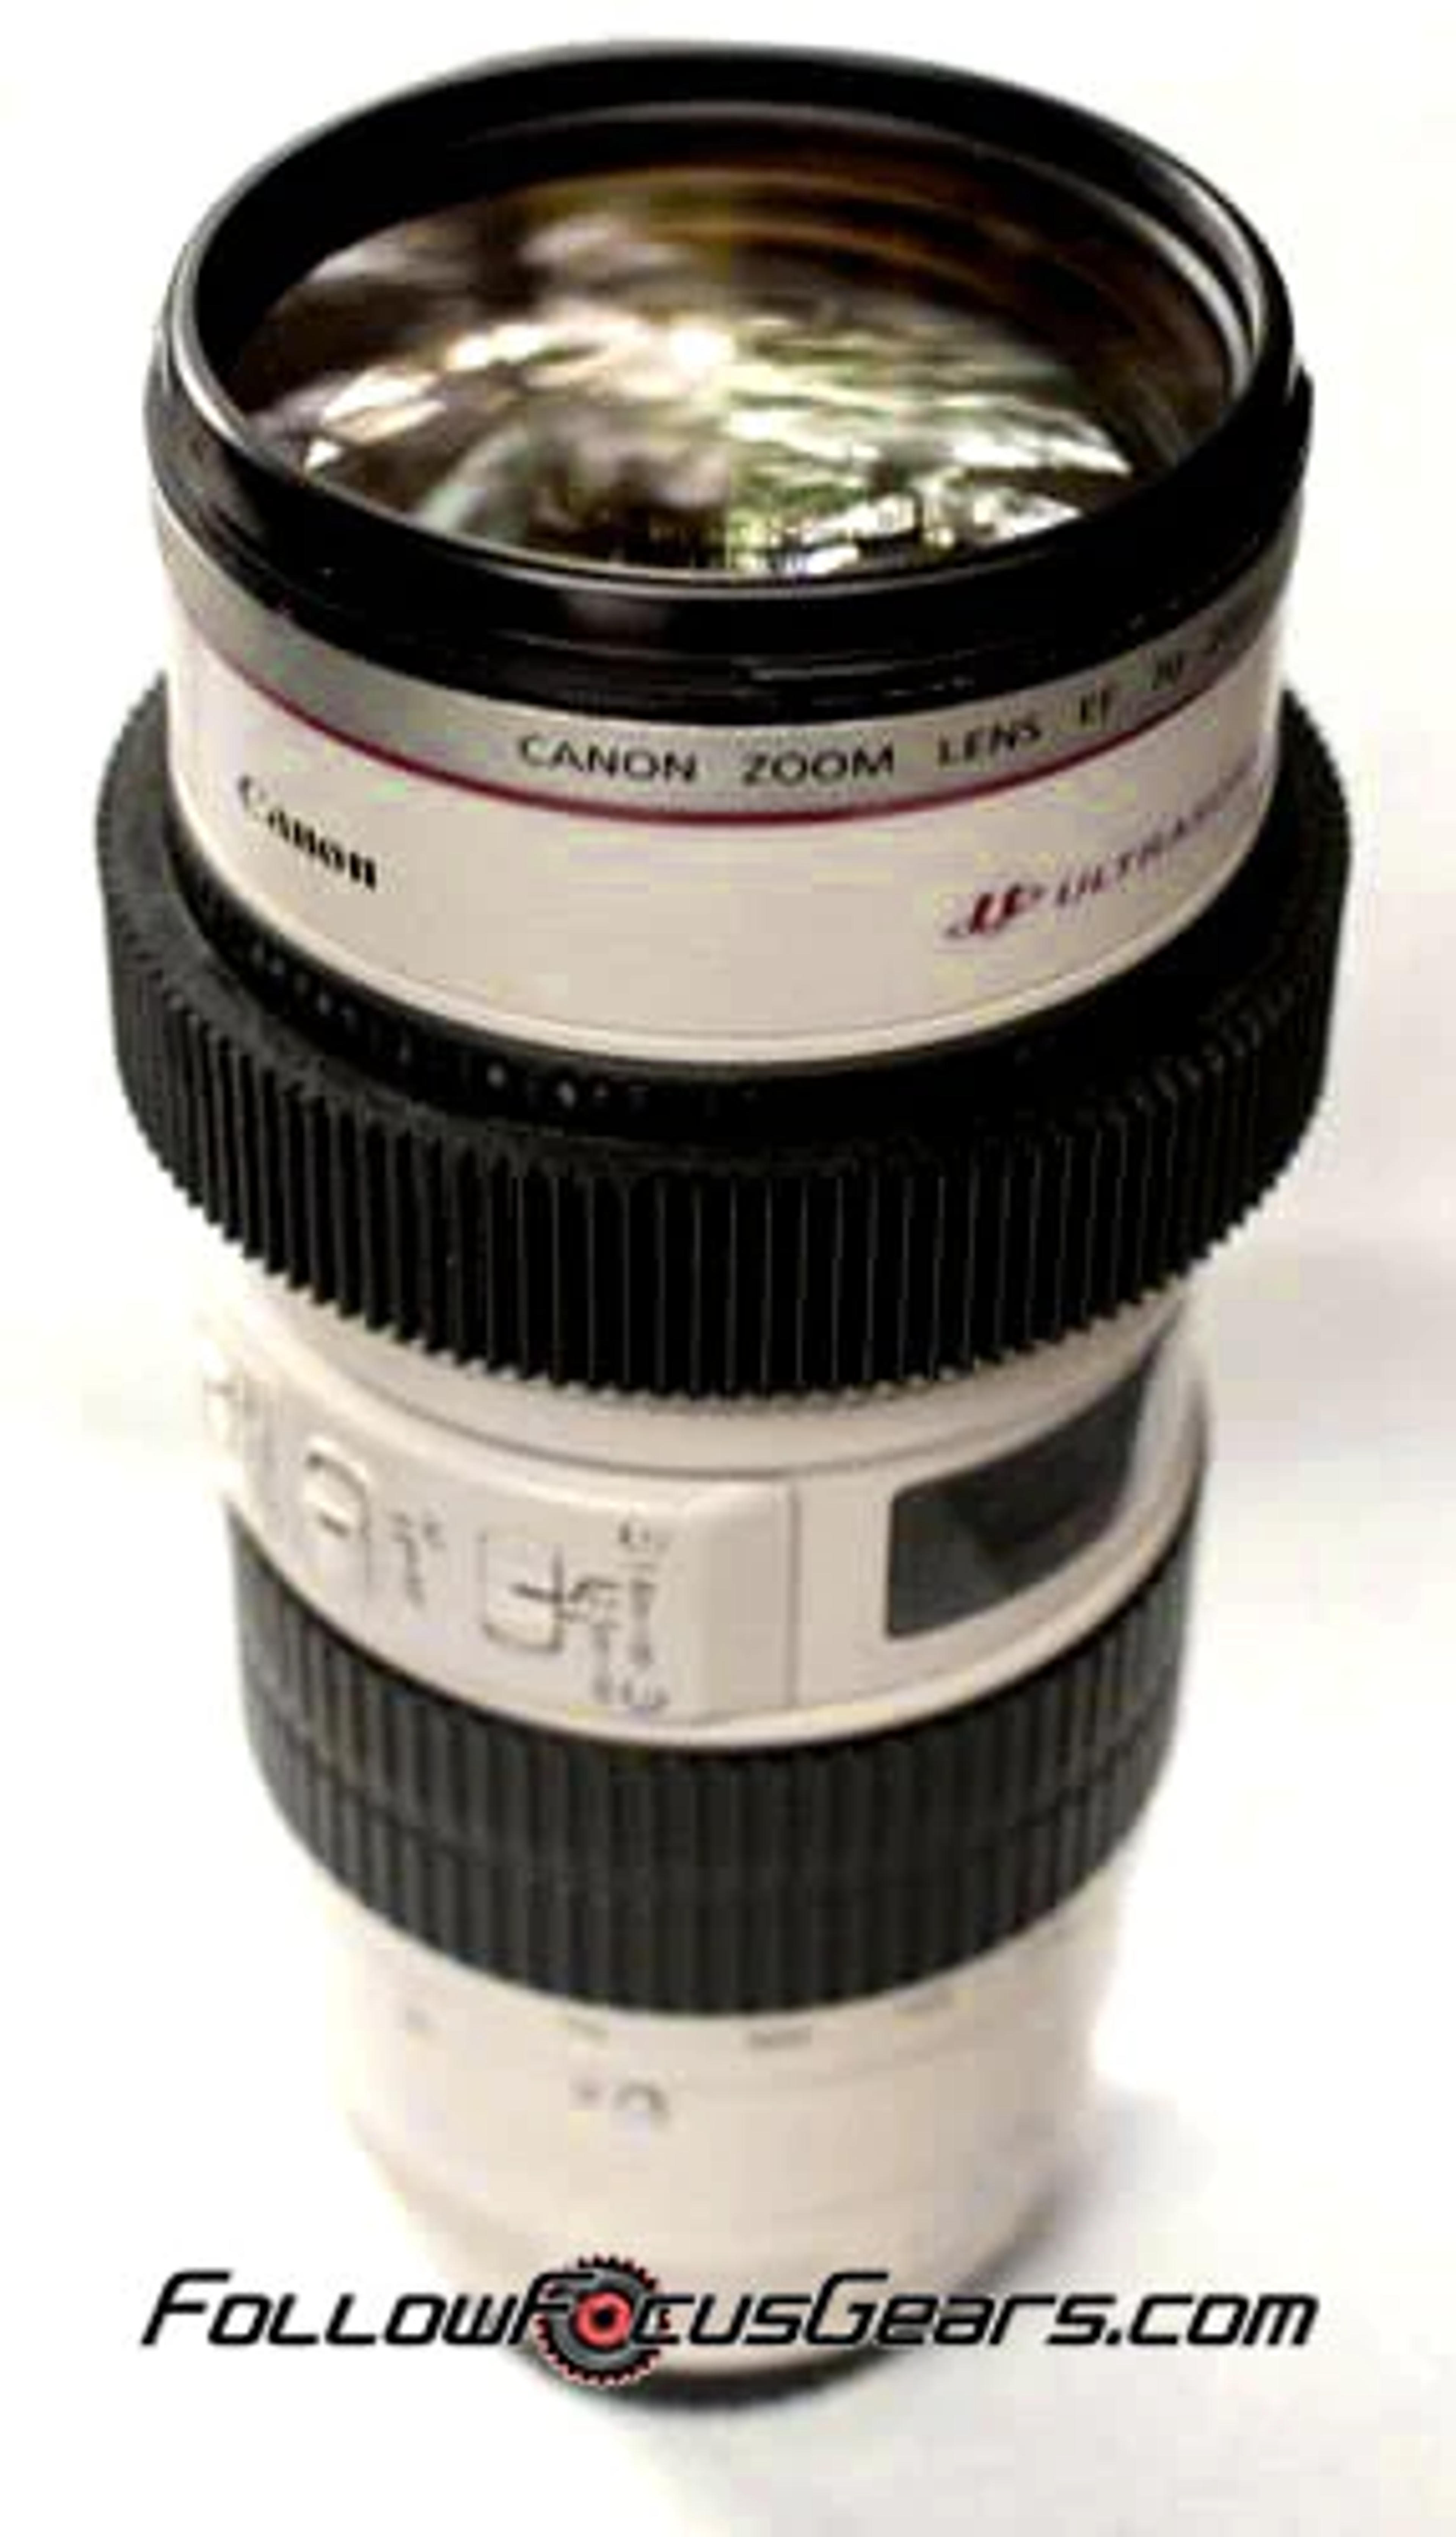 Seamless™ Follow Focus Gear for Canon EF 70-200mm f2.8 L Series USM (Non IS) Lens